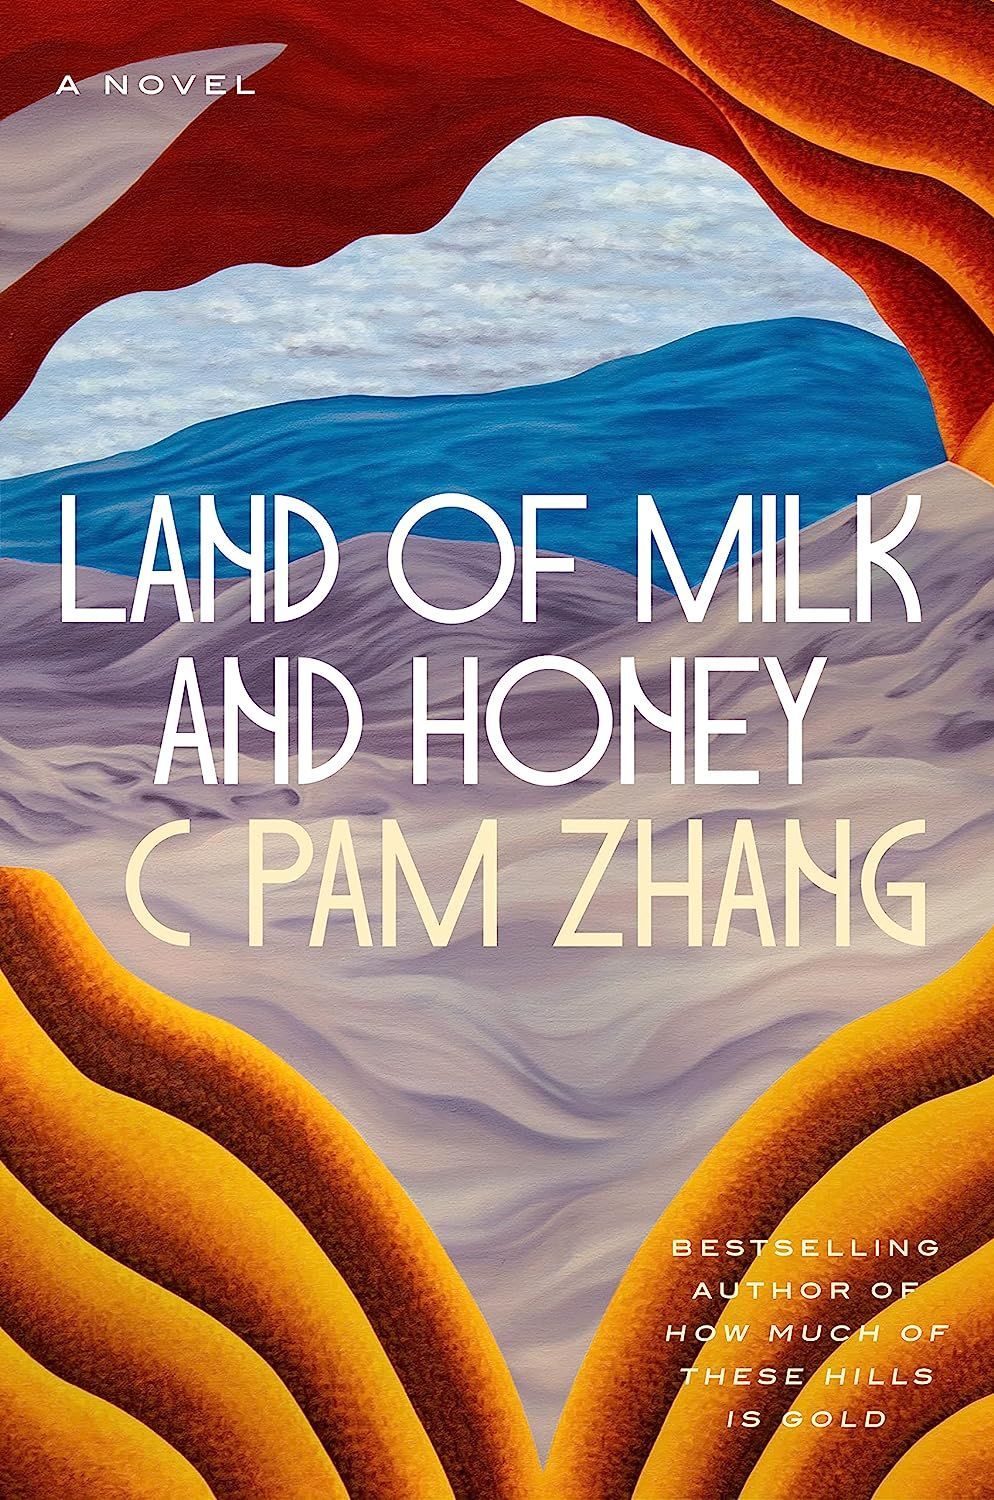 Finding Pleasure in Survival: On C Pam Zhang’s “Land of Milk and Honey”